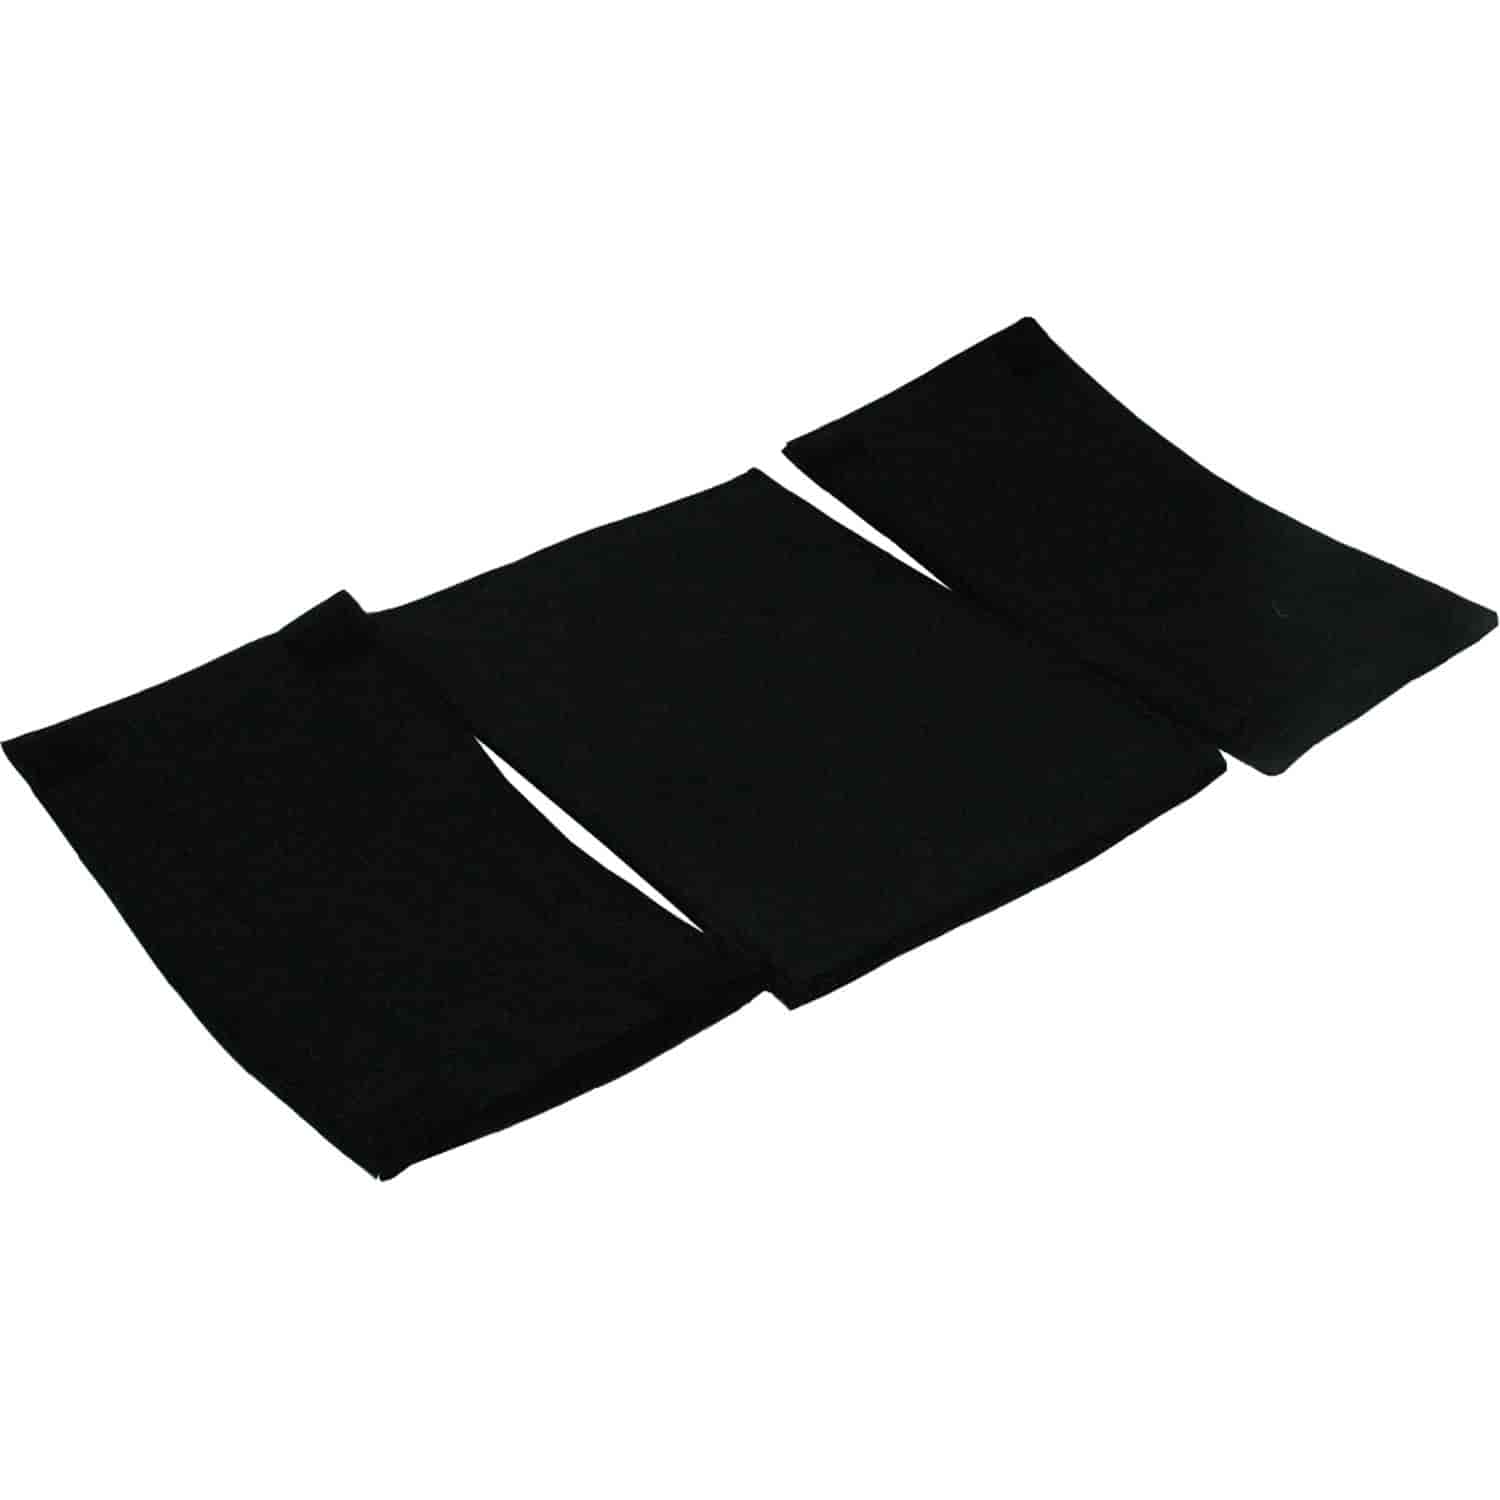 Replacement Oil Pads for 821-7811A Pad One Dimensions: 17" x 20"